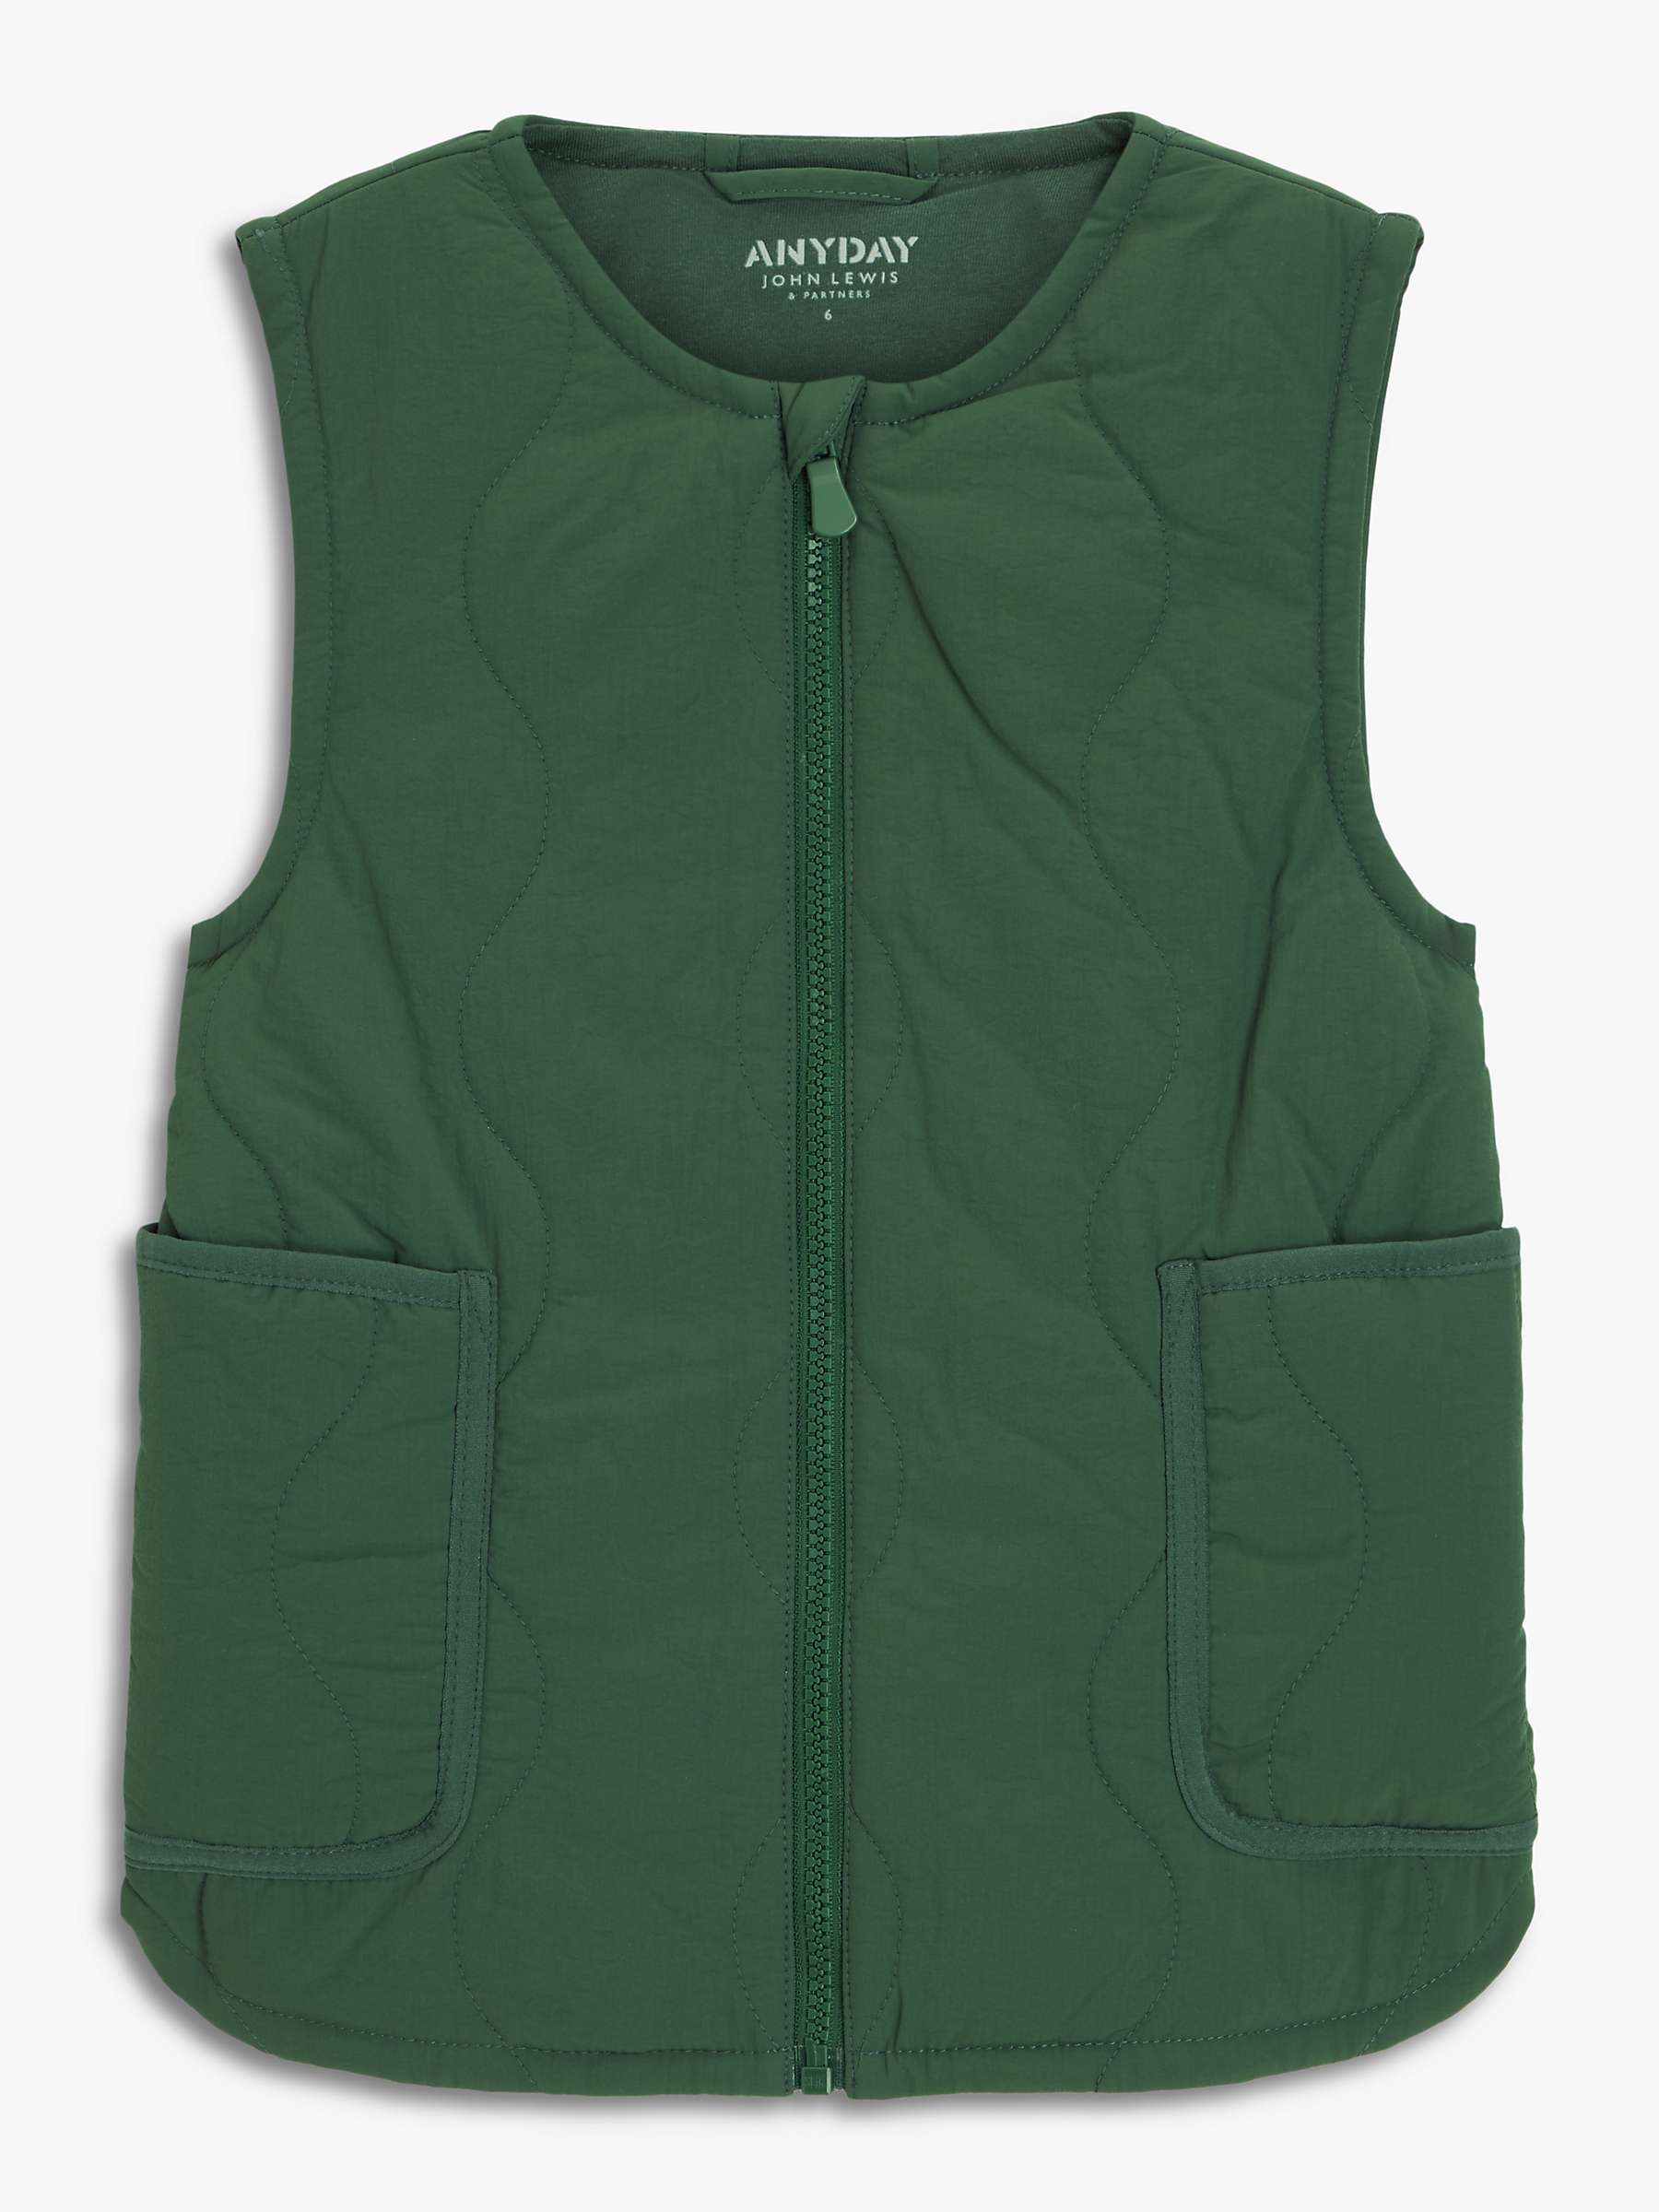 Buy John Lewis ANYDAY Kids' Plain Onion Quilted Gilet, Khaki Online at johnlewis.com